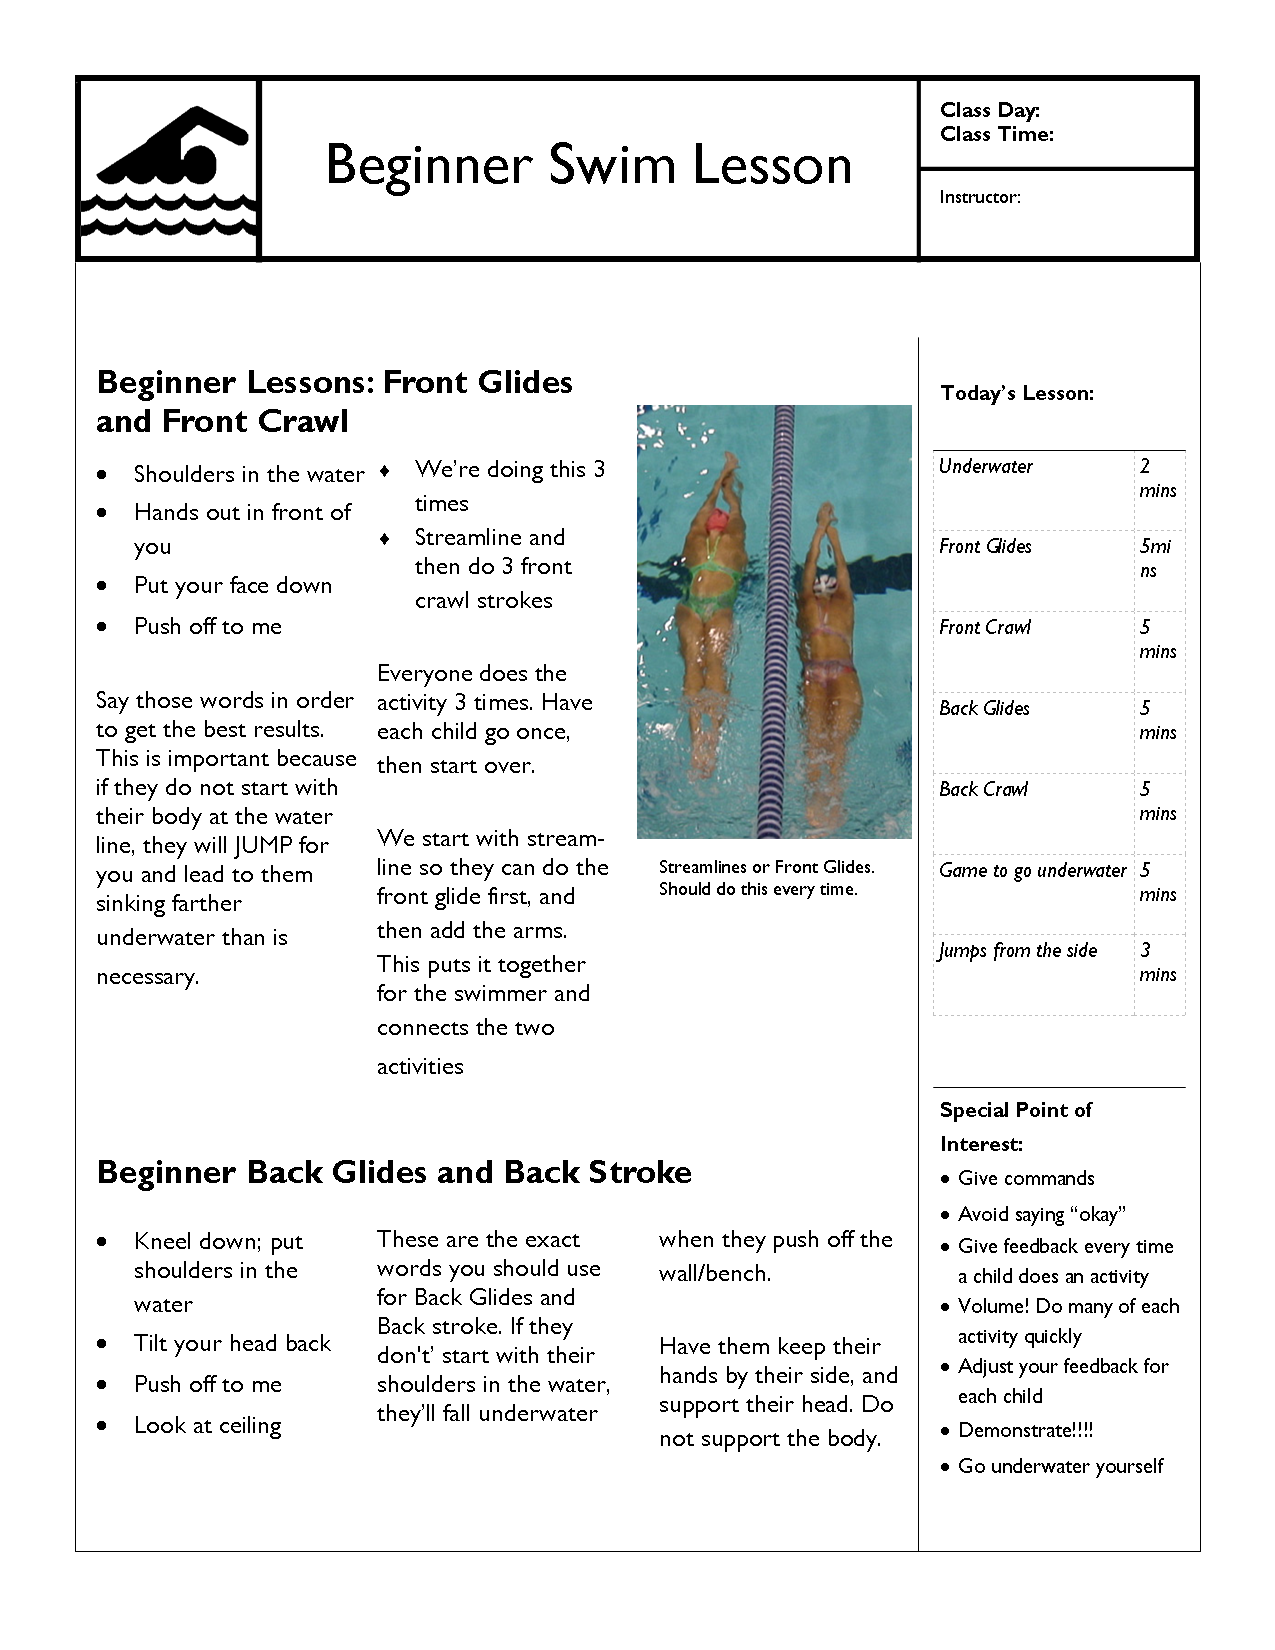 swim-lesson-templates-and-plans-learn-how-and-when-to-use-them-and-create-your-own-swimming